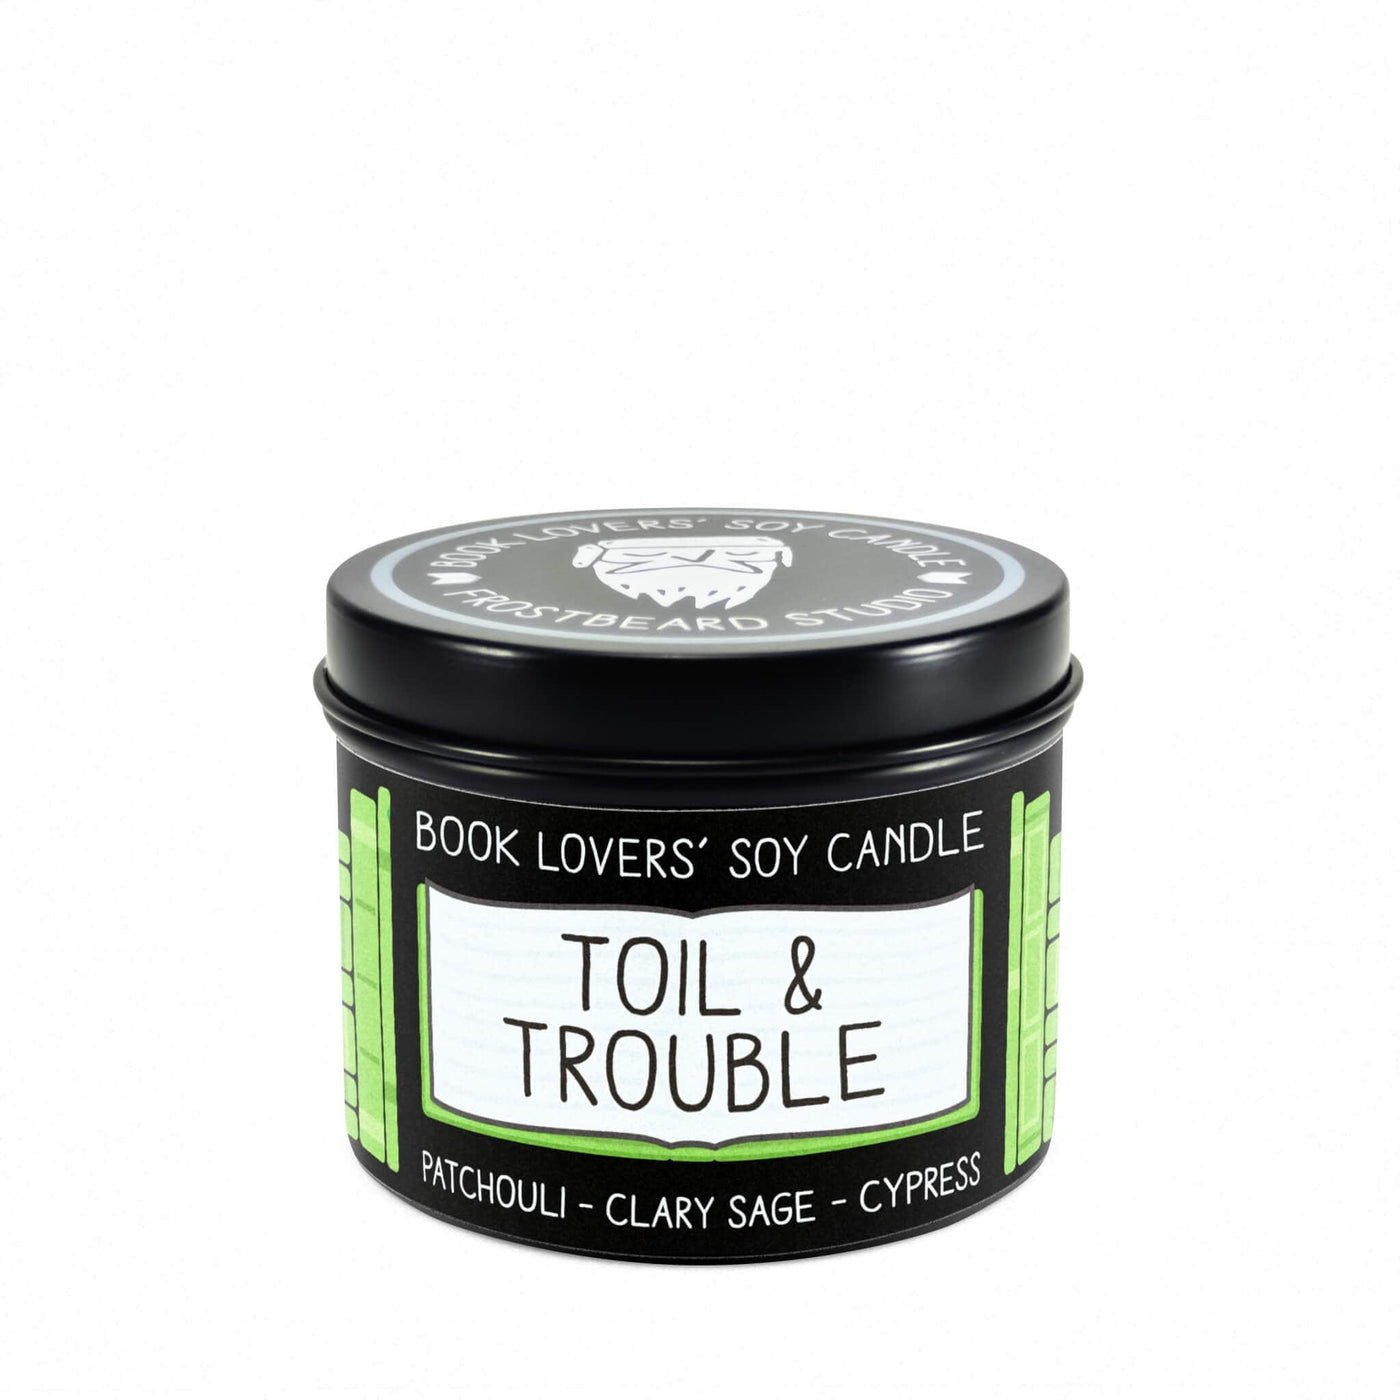 Toil & Trouble  -  4 oz Tin  -  Book Lovers' Soy Candle  -  Frostbeard Studio